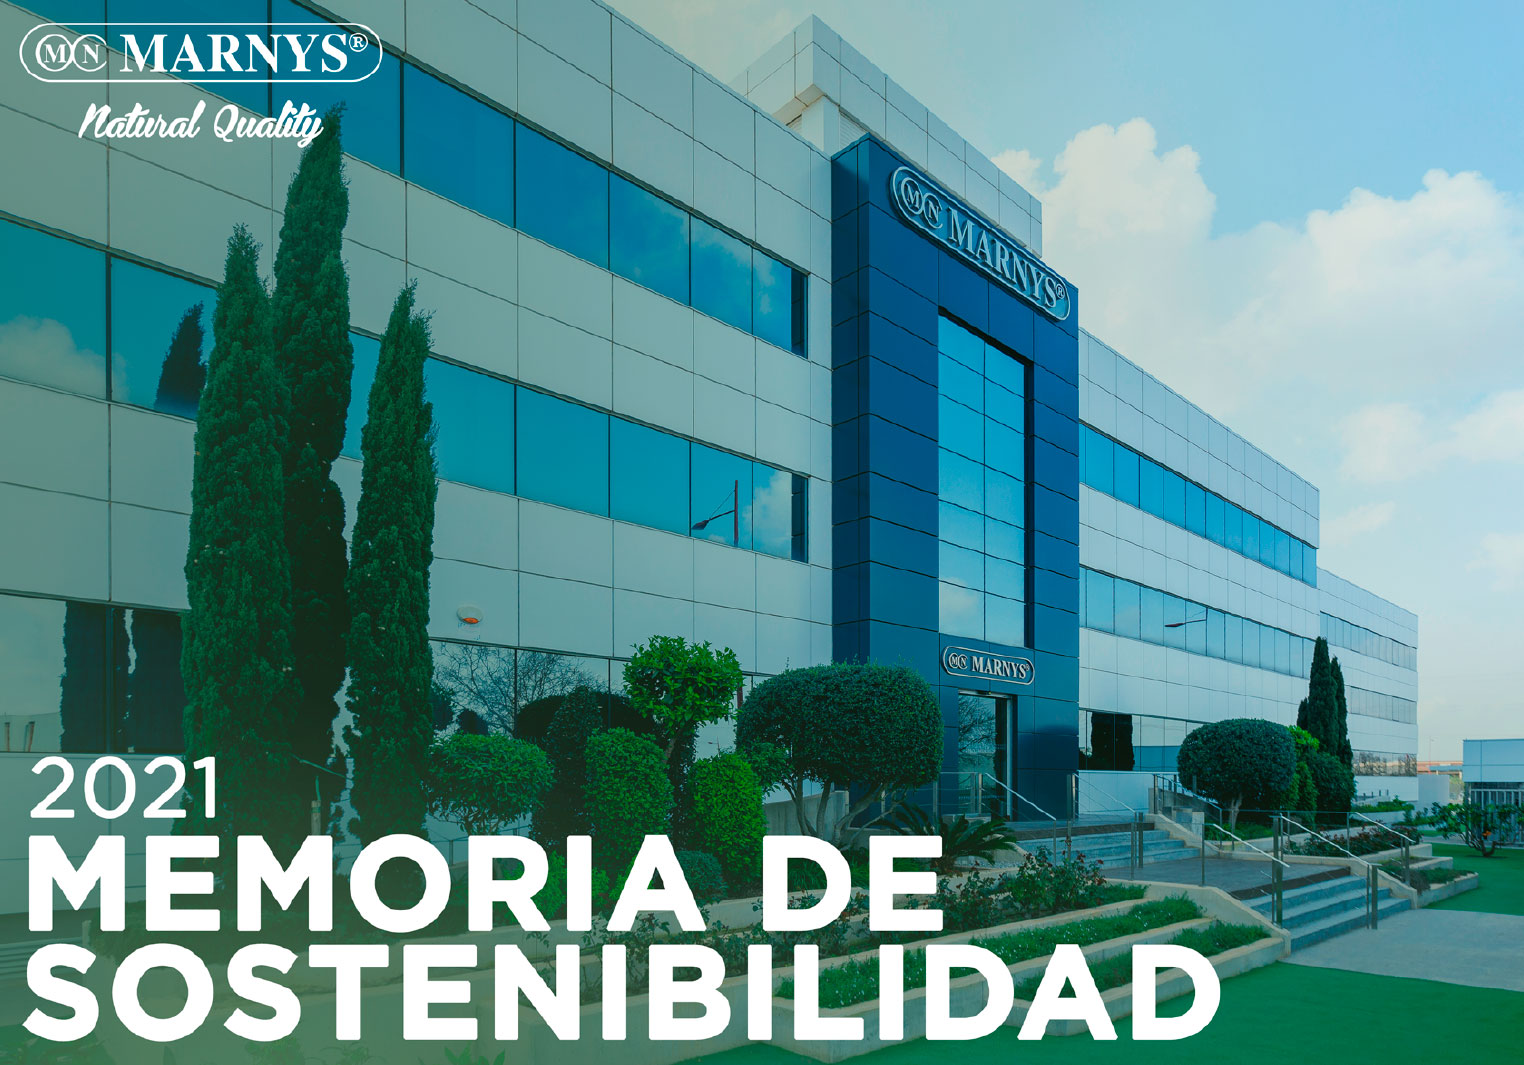 MARNYS – Martínez Nieto, S.A publishes its 2021 sustainability report